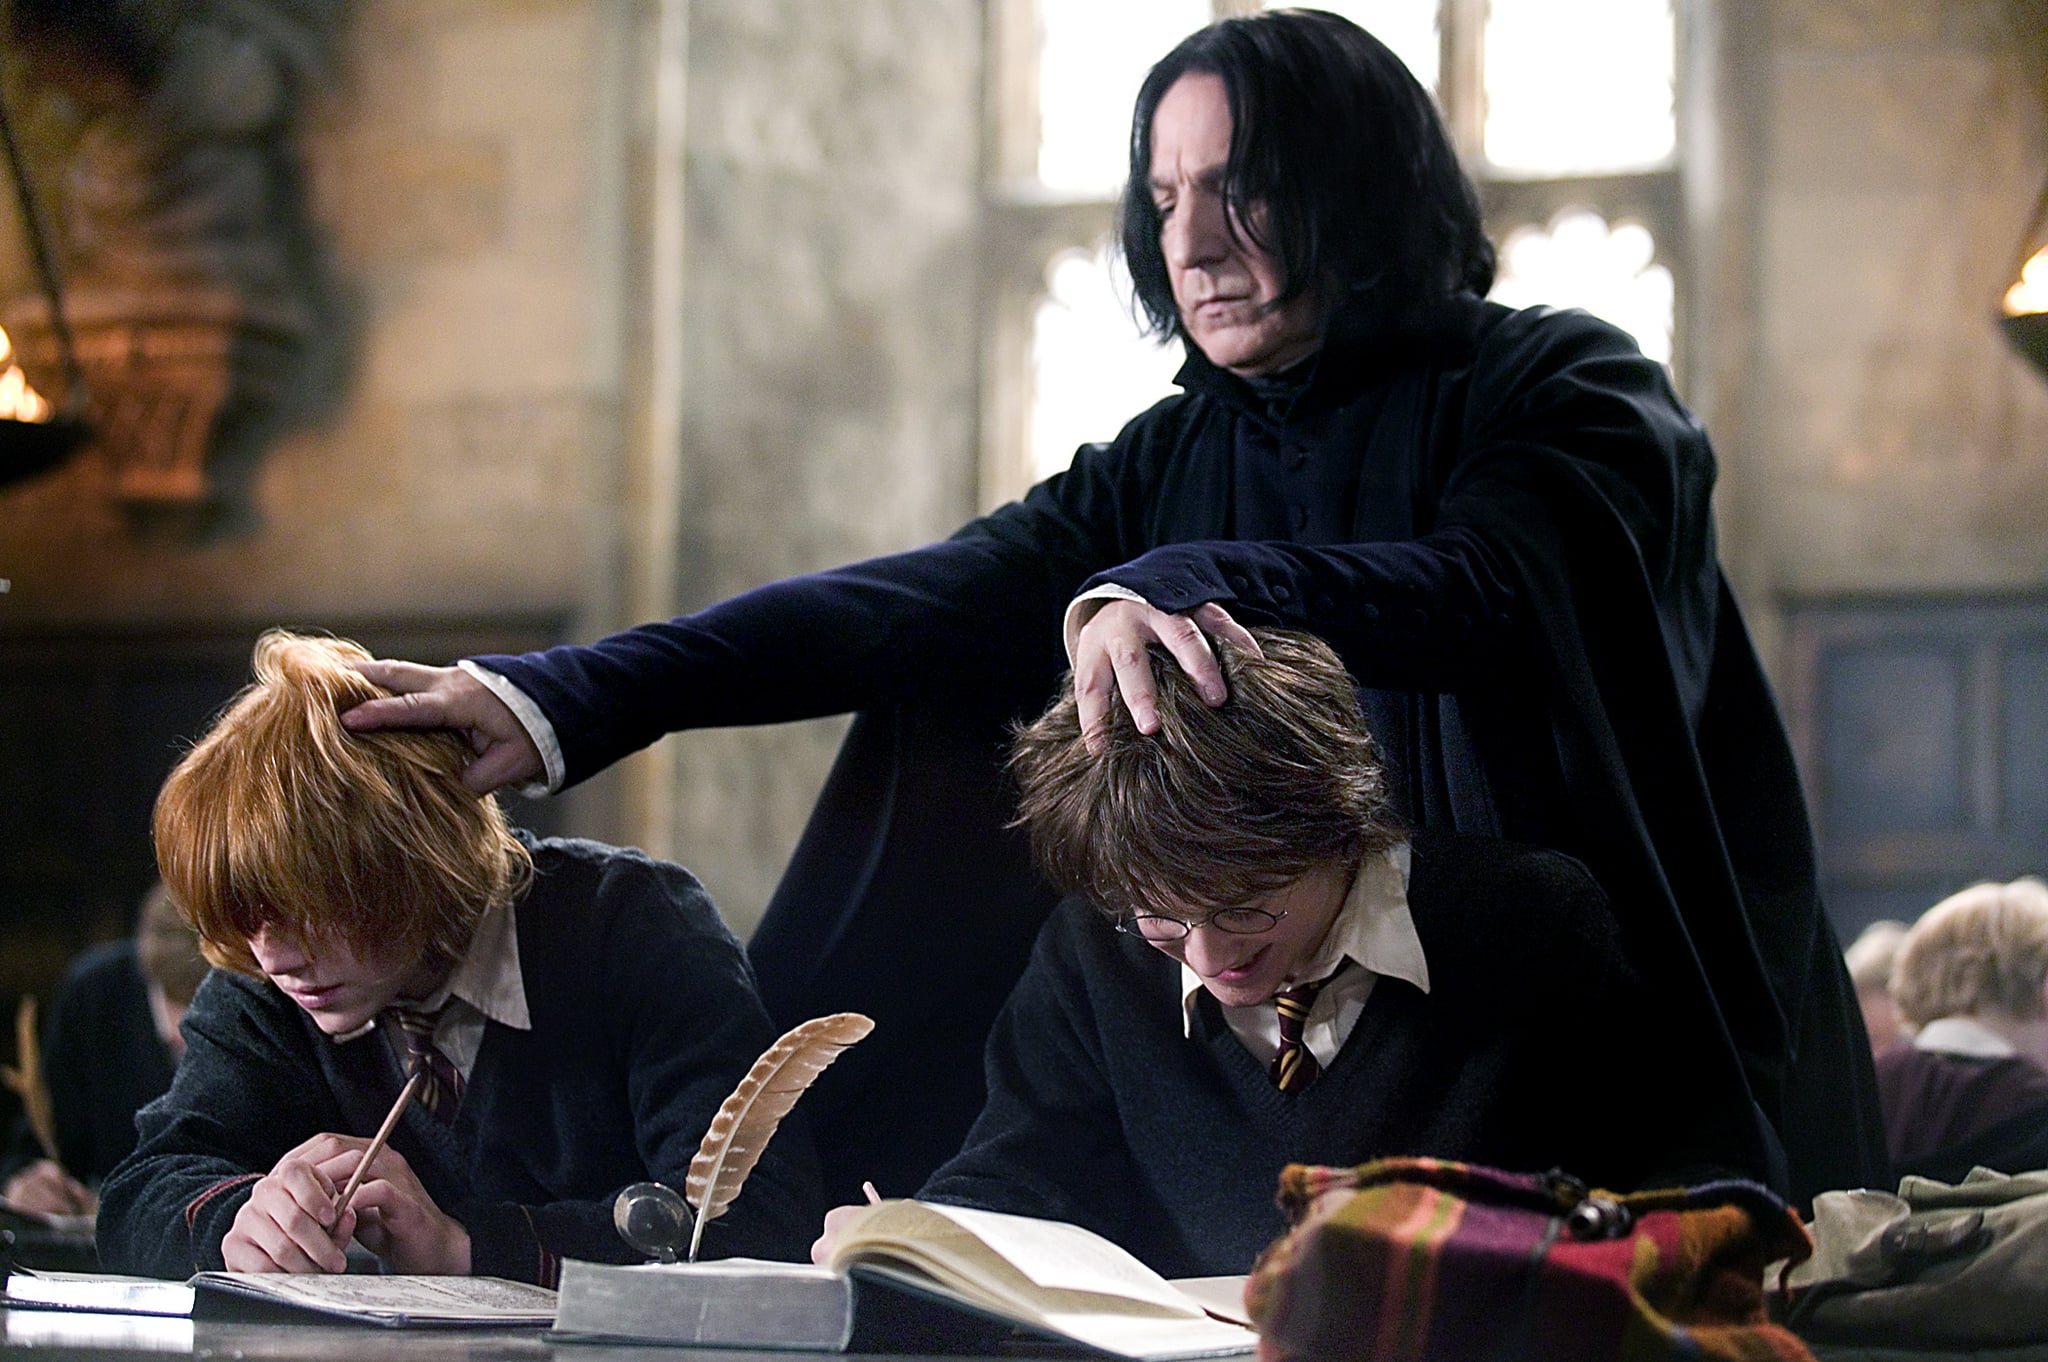 HARRY POTTER AND THE GOBLET OF FIRE, Rupert Grint, Alan Rickman, Daniel Radcliffe, 2005, (c) Warner Brothers/courtesy Everett Collection